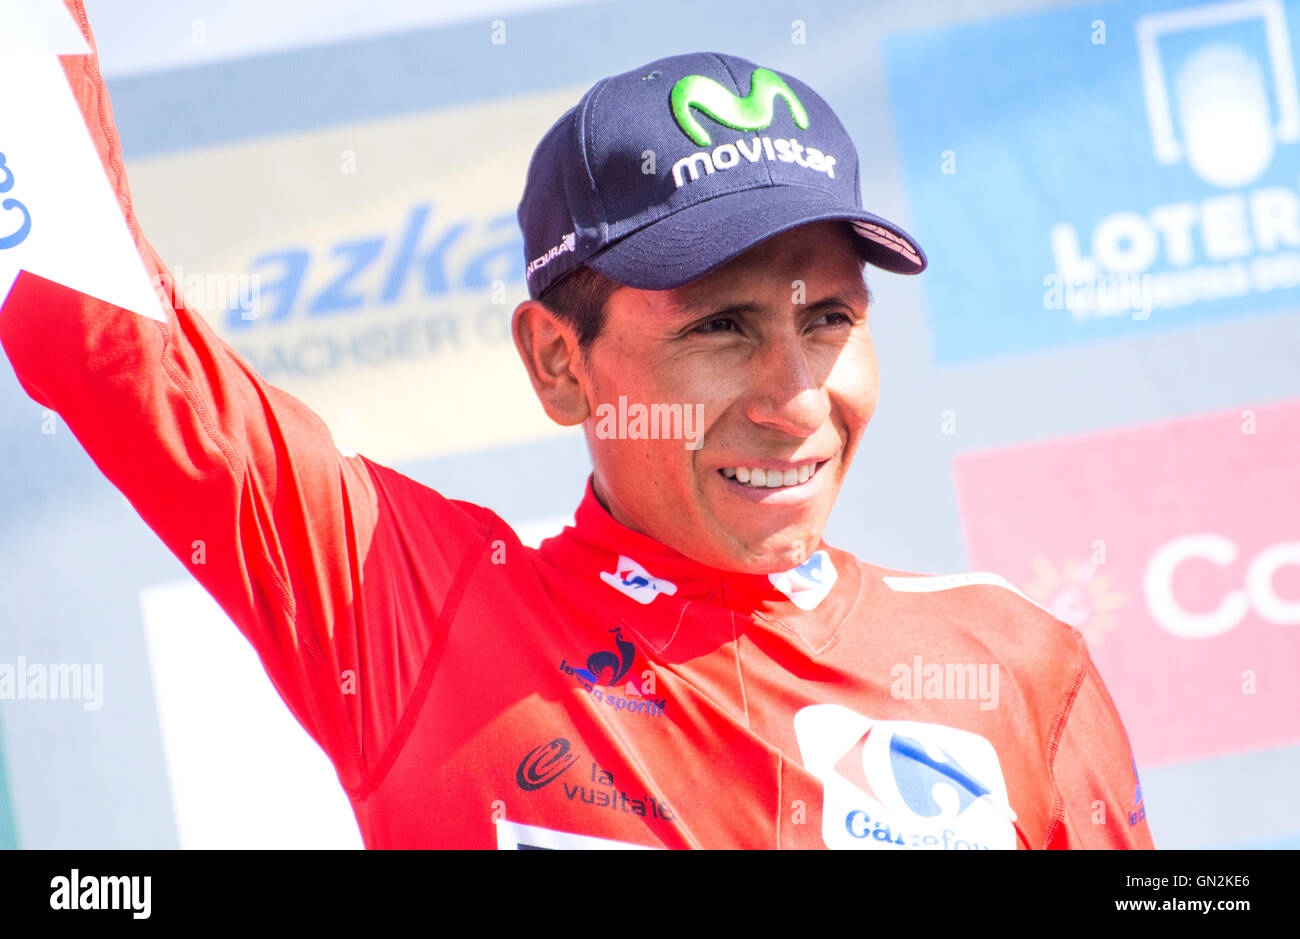 La Camperona, Spain. 27th August, 2016. Nairo Quintana (Movistar Team) with leader maillot at the podium of 8th stage of cycling race ‘La Vuelta a España’ (Tour of Spain) between Villalpando and Climb of La Camperona on August 27, 2016 in Leon, Spain. Credit: David Gato/Alamy Live News Stock Photo